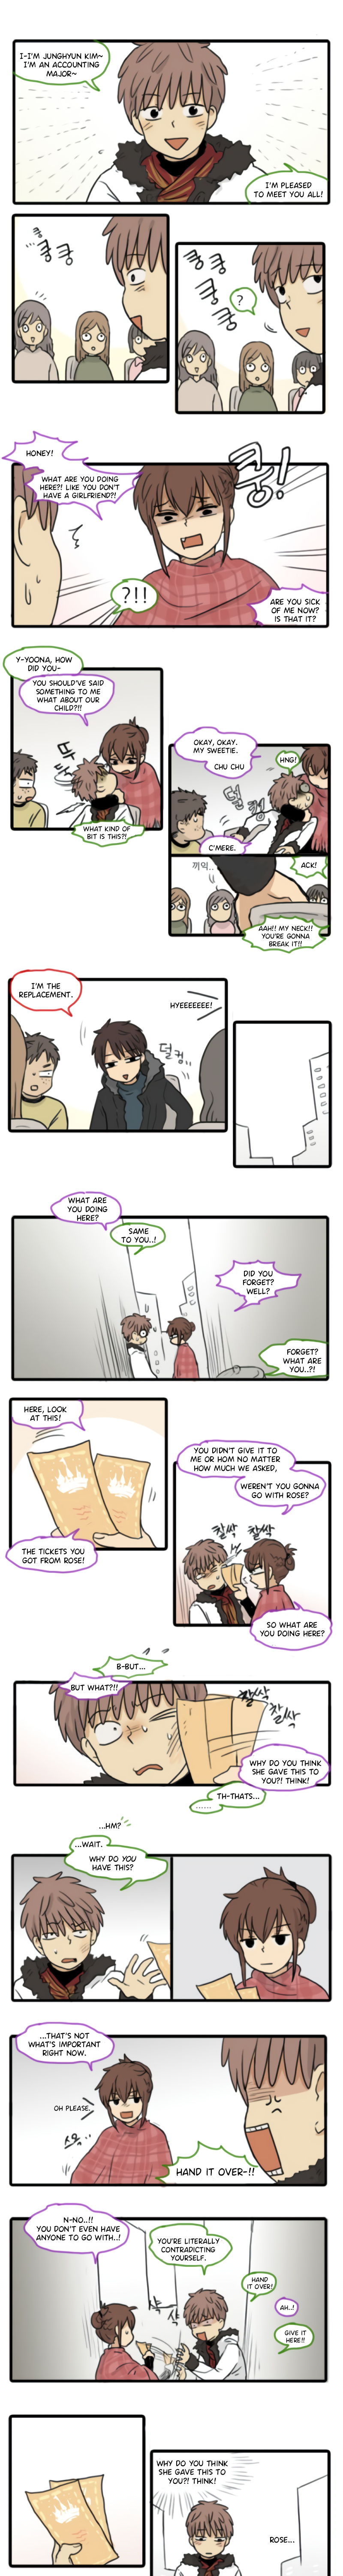 Welcome To Room #305! - Page 2